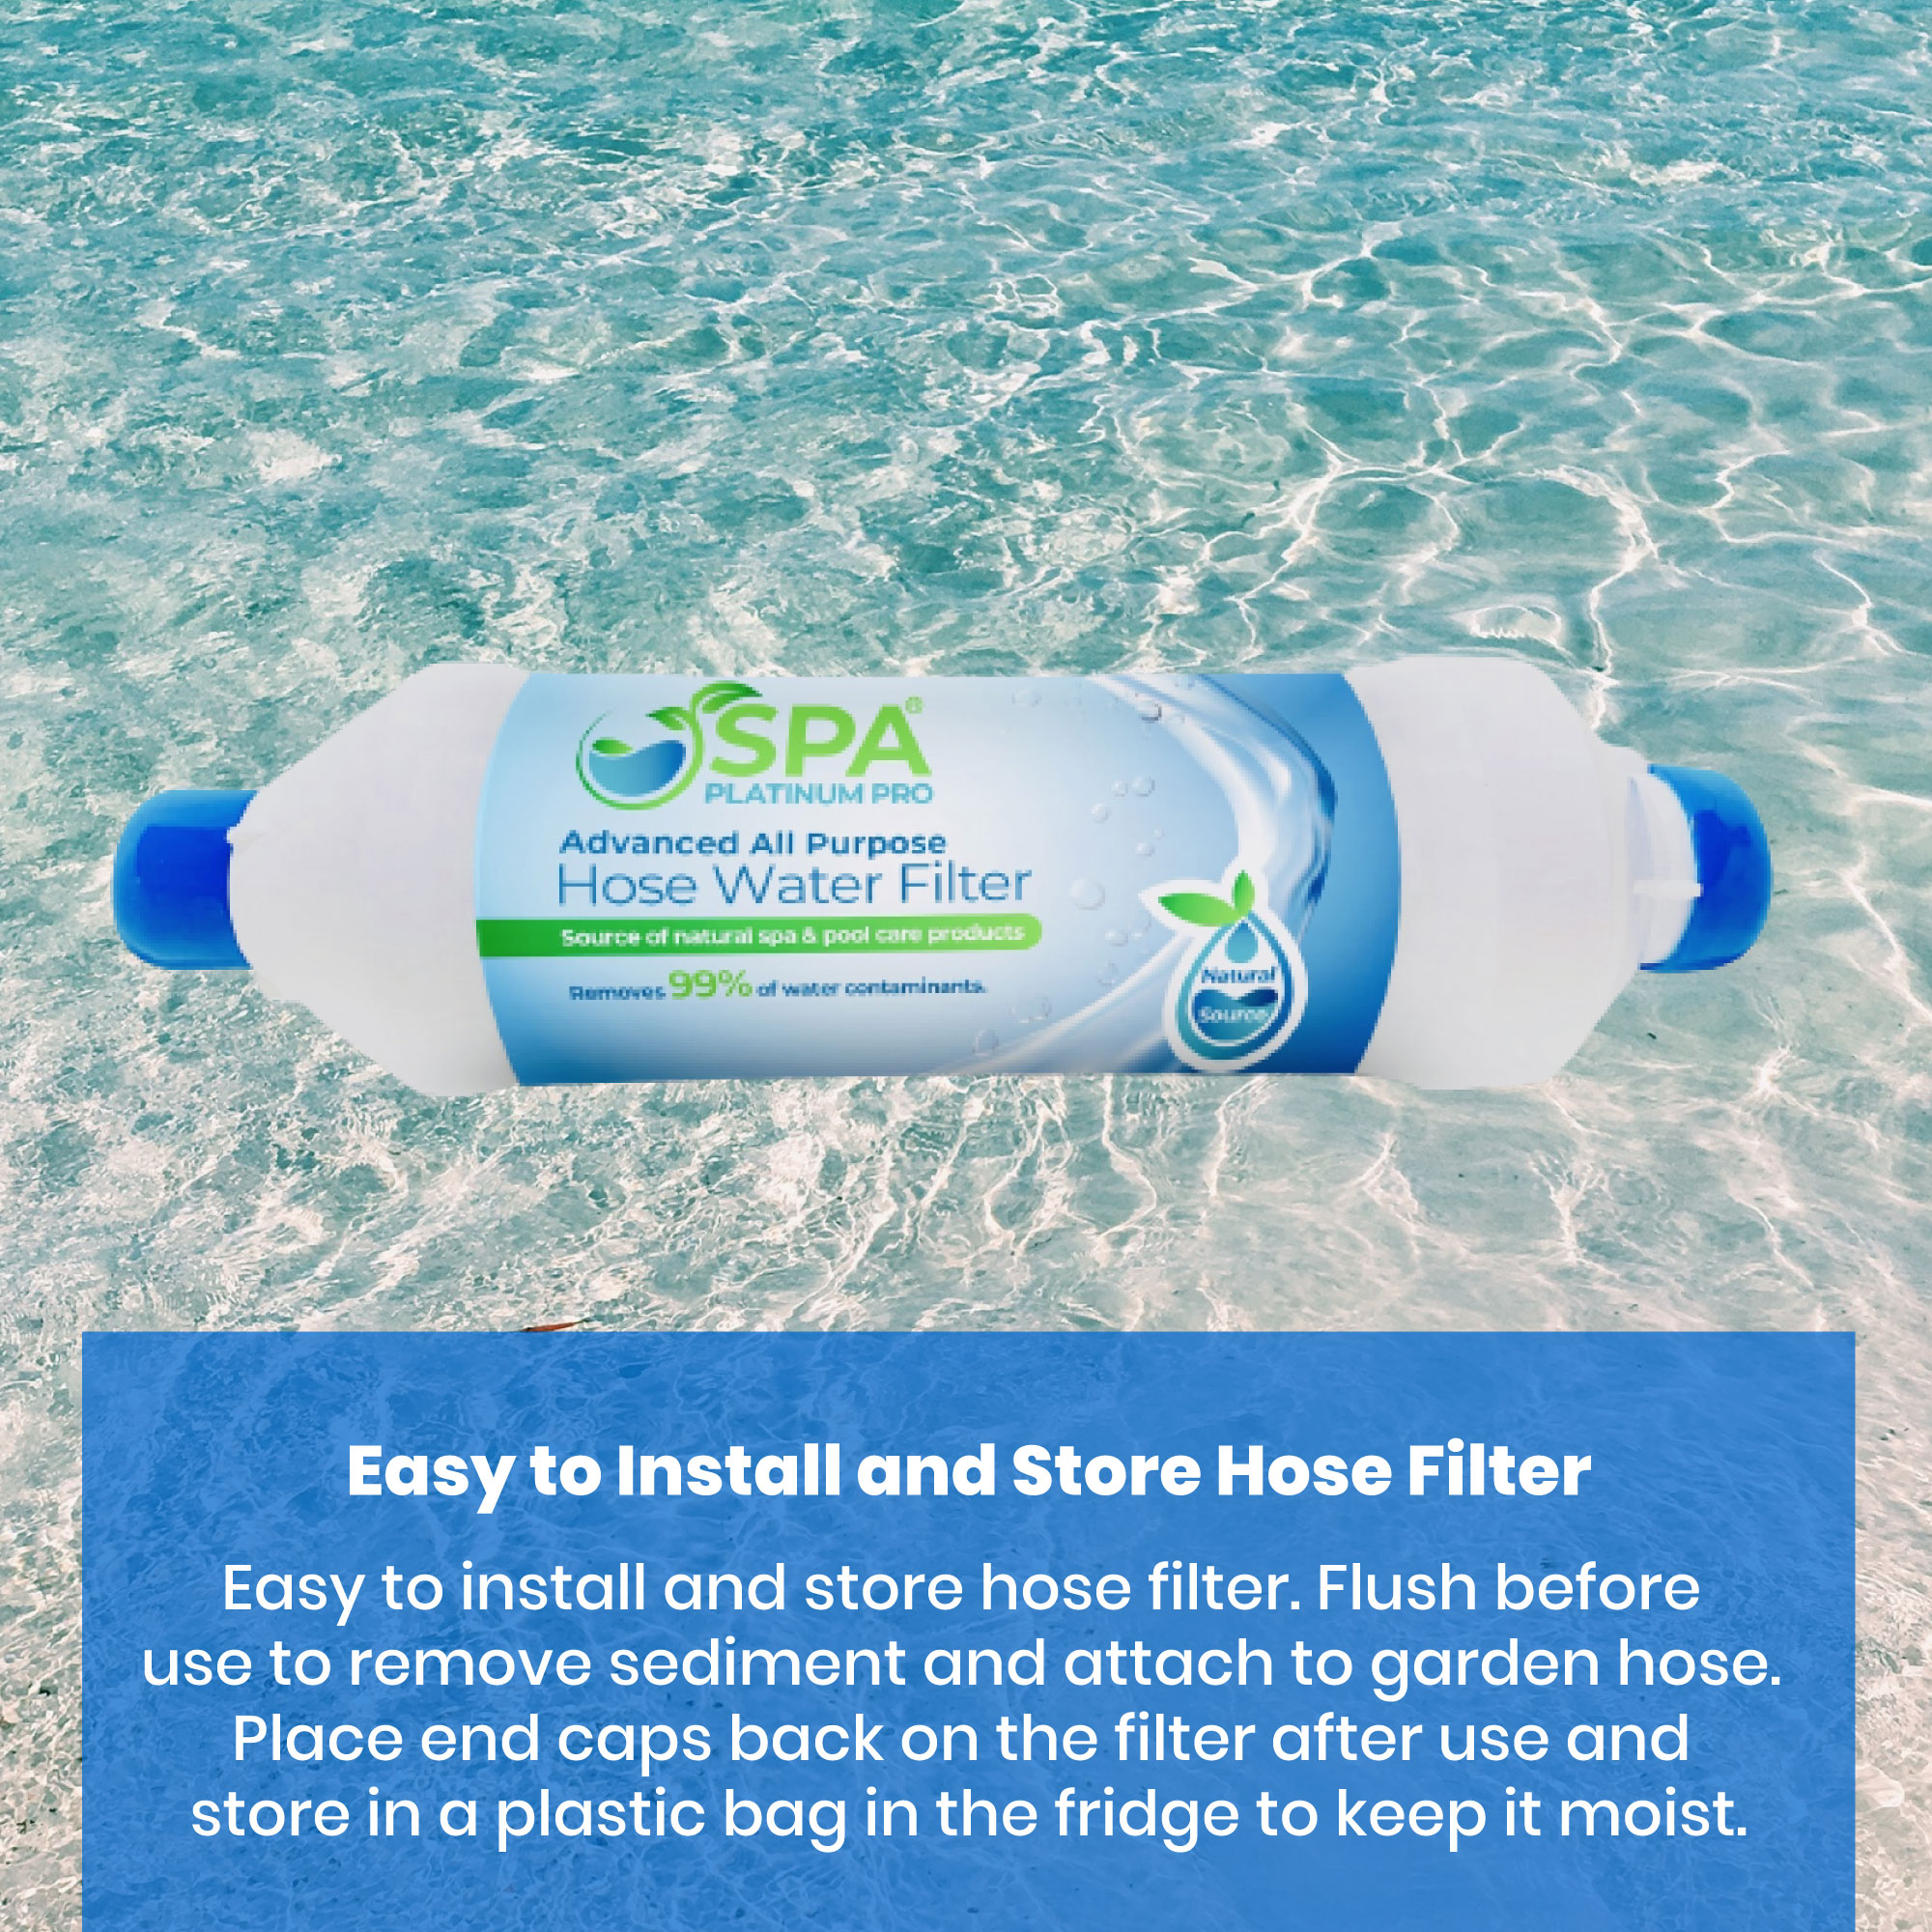 Hose Water Filter(Advanced All Purpose Hose Water Filter) - Spa Platinum  Pro. Hot tub, spa and pool products, all made with natural ingredients